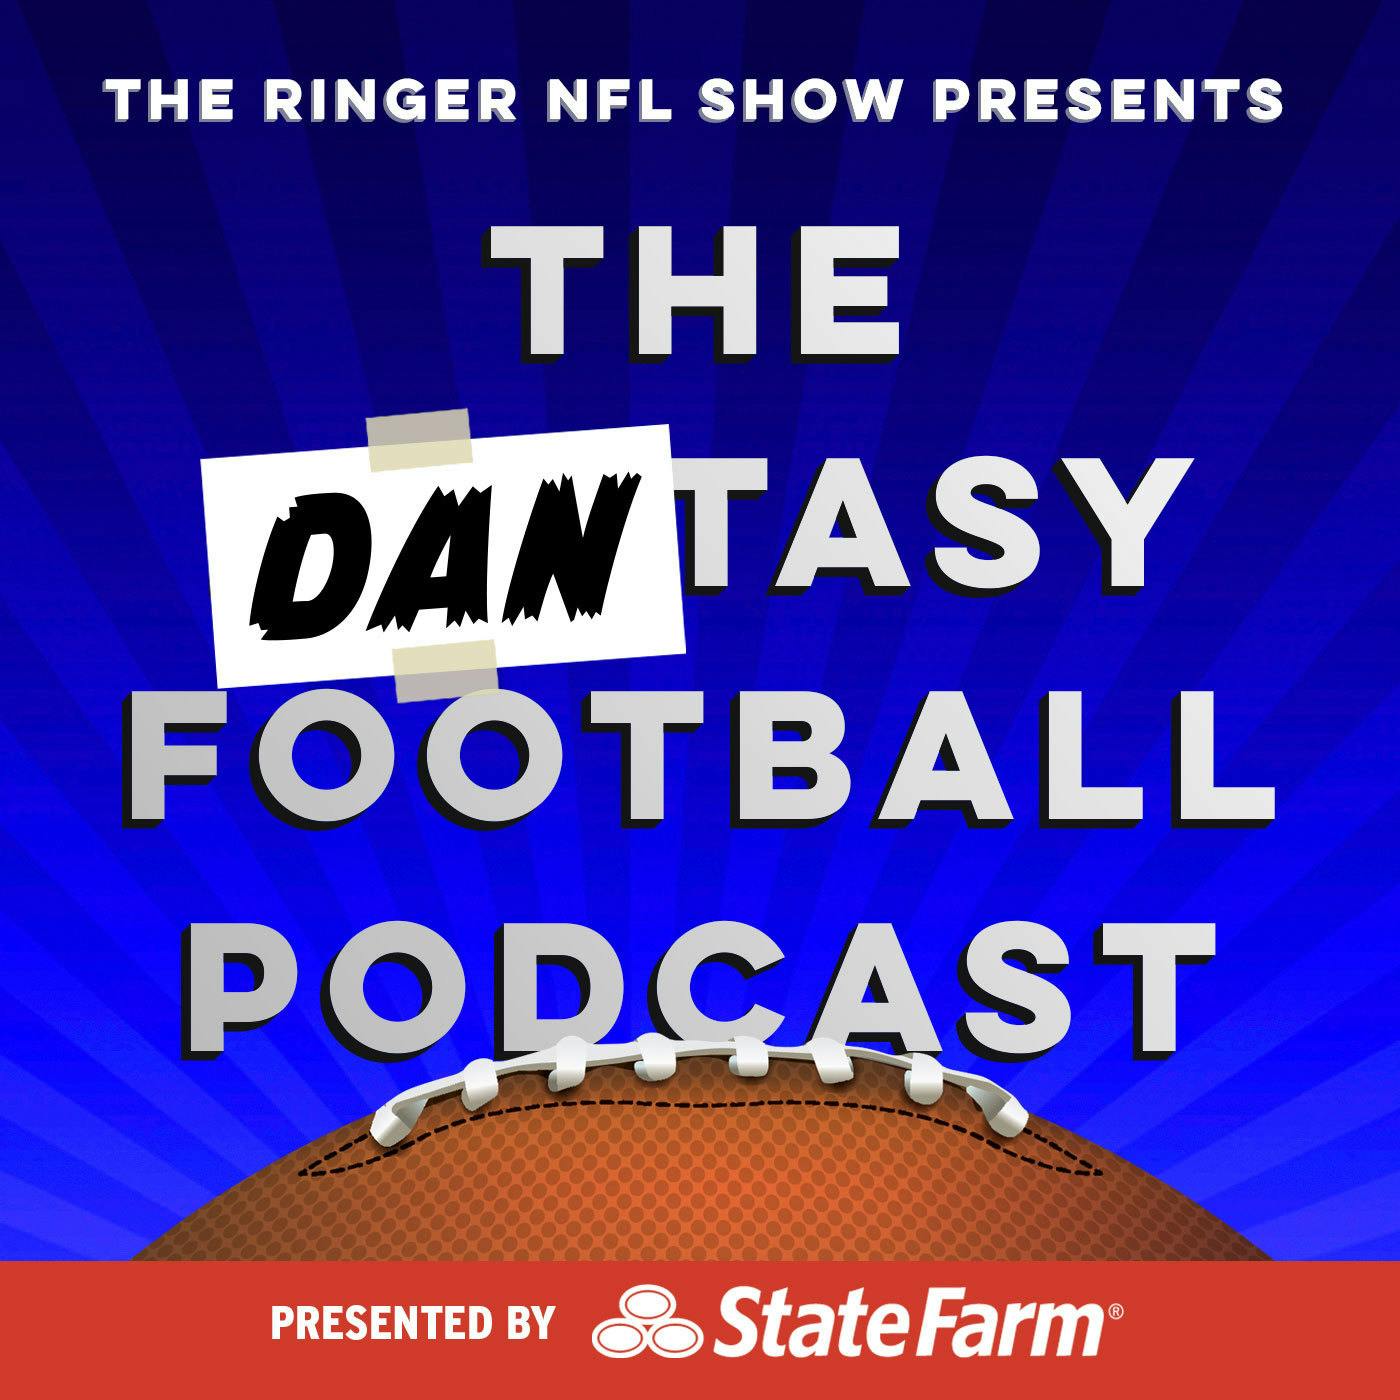 Stranger Danger: Can You Trust Any Week 8 Breakout Players? Plus: The Extreme Fantasy Football League | The Dantasy Football Podcast